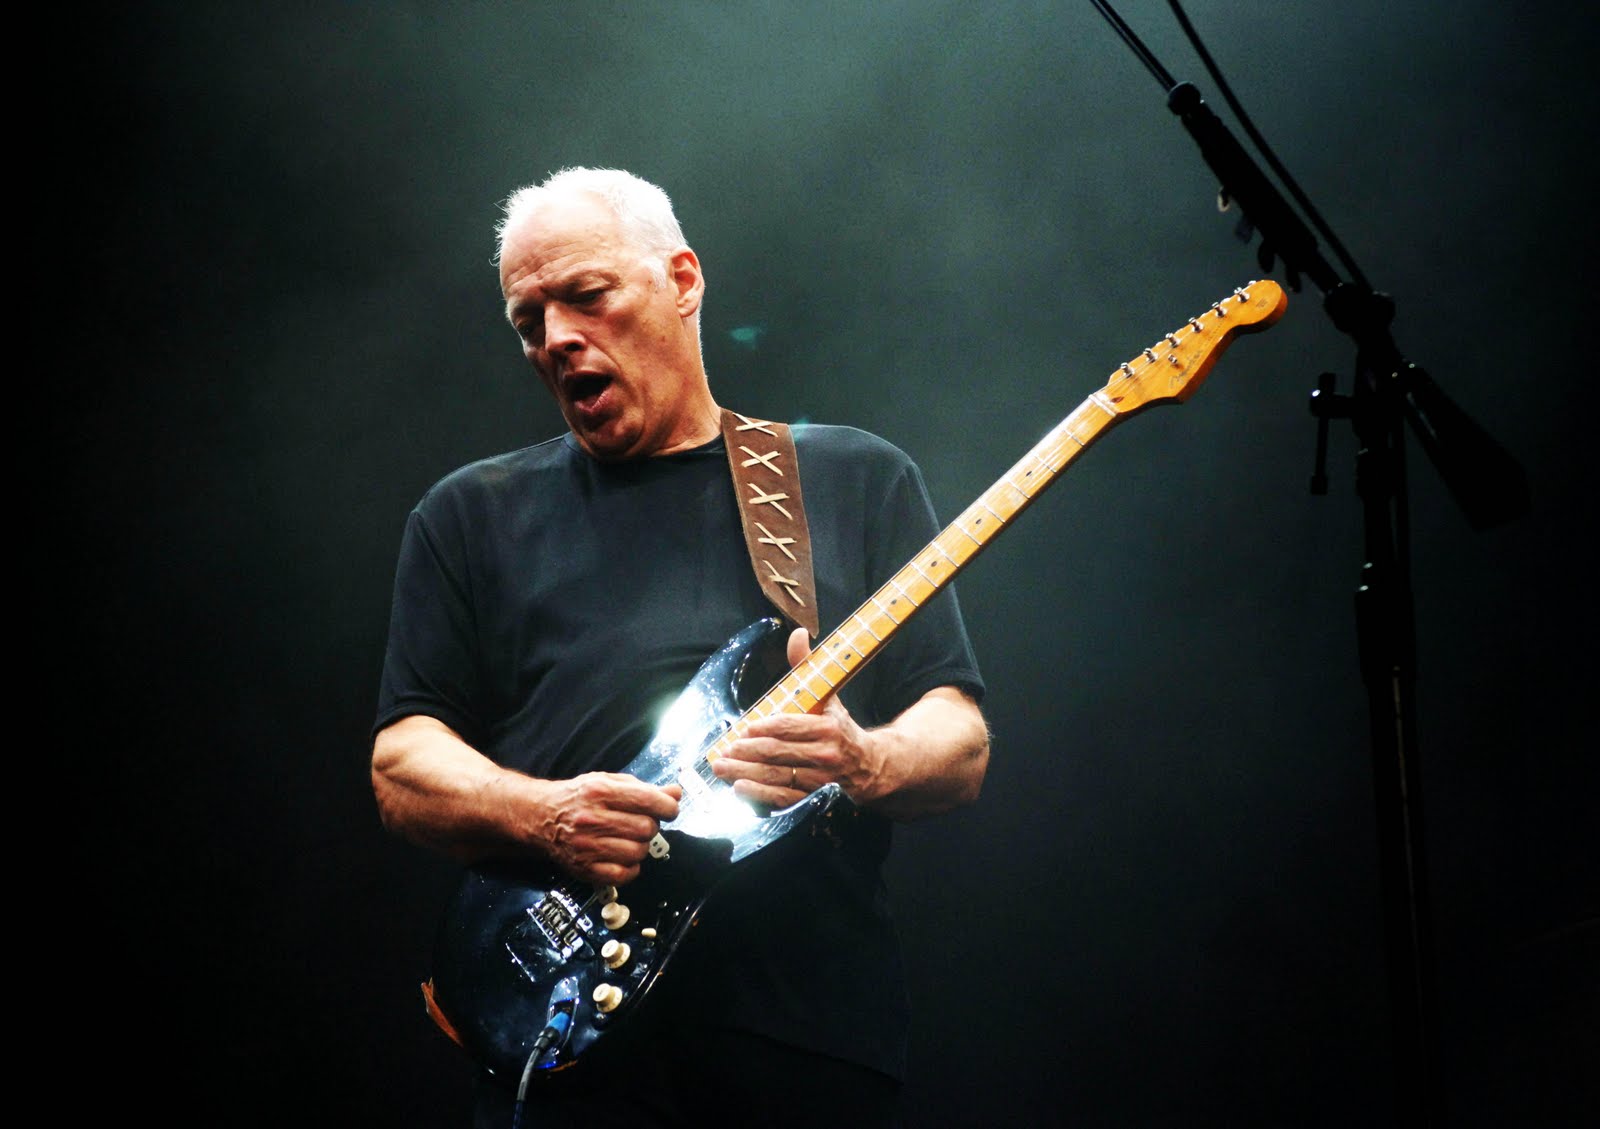 David Gilmour Says He’s Done with Pink Floyd